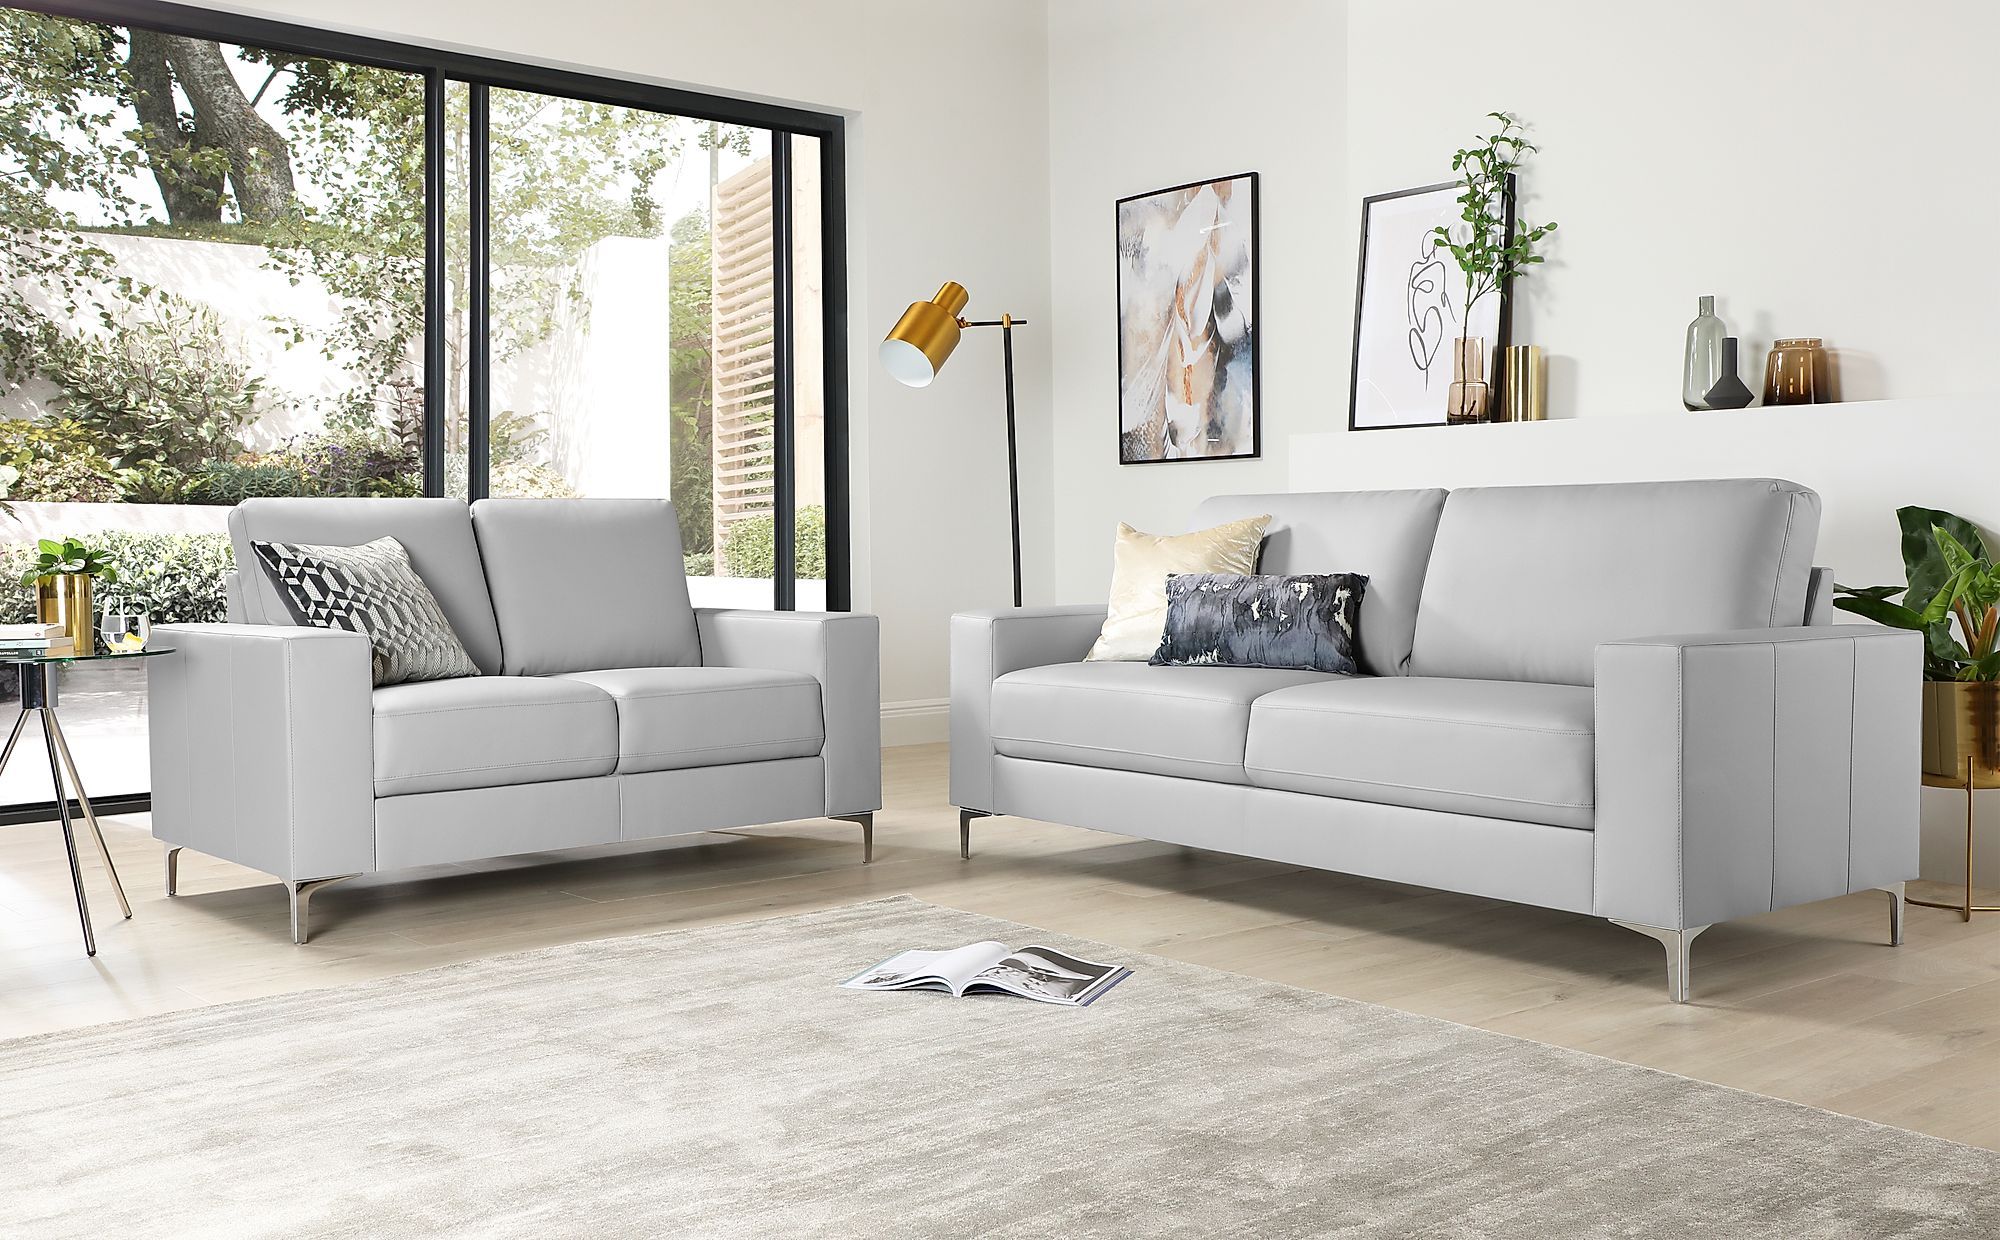 Baltimore Light Grey Leather 3+2 Seater Sofa Set | Furniture Choice Intended For Sofas In Light Gray (View 7 of 22)